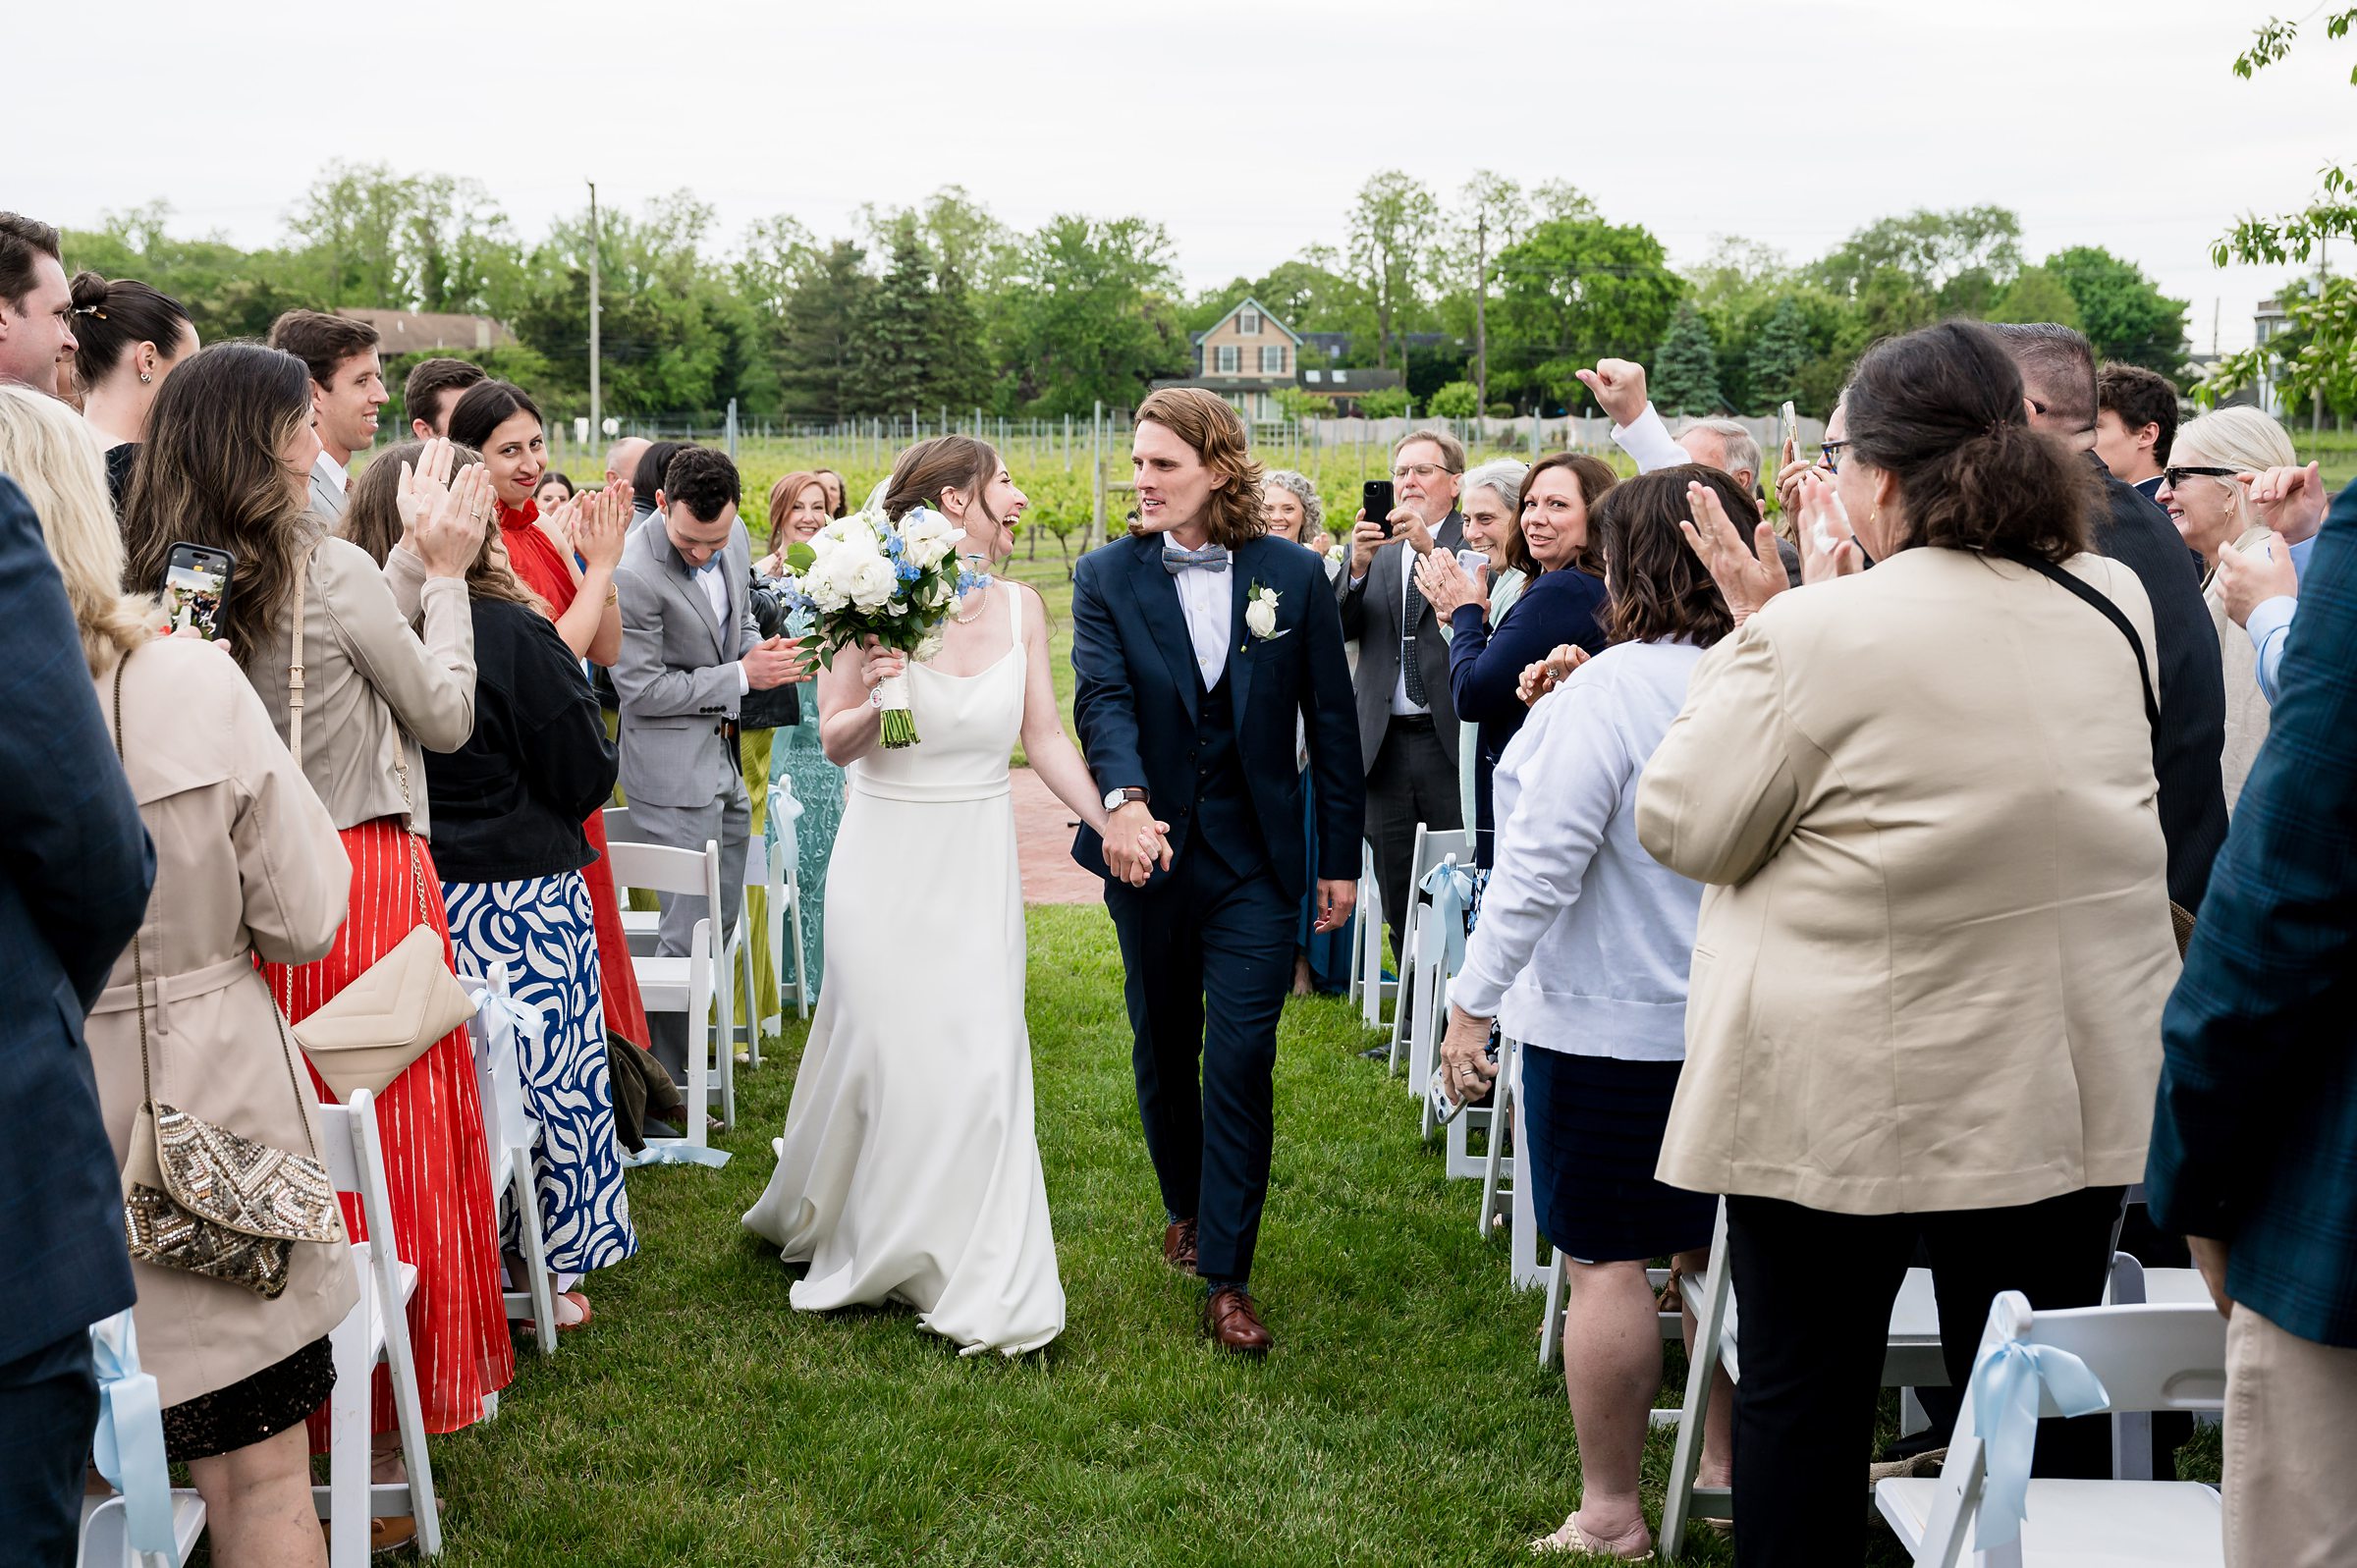 A bride and groom walk down an outdoor aisle holding hands, surrounded by applauding guests. Both are smiling, the groom in a dark suit and the bride in a white gown holding a bouquet.